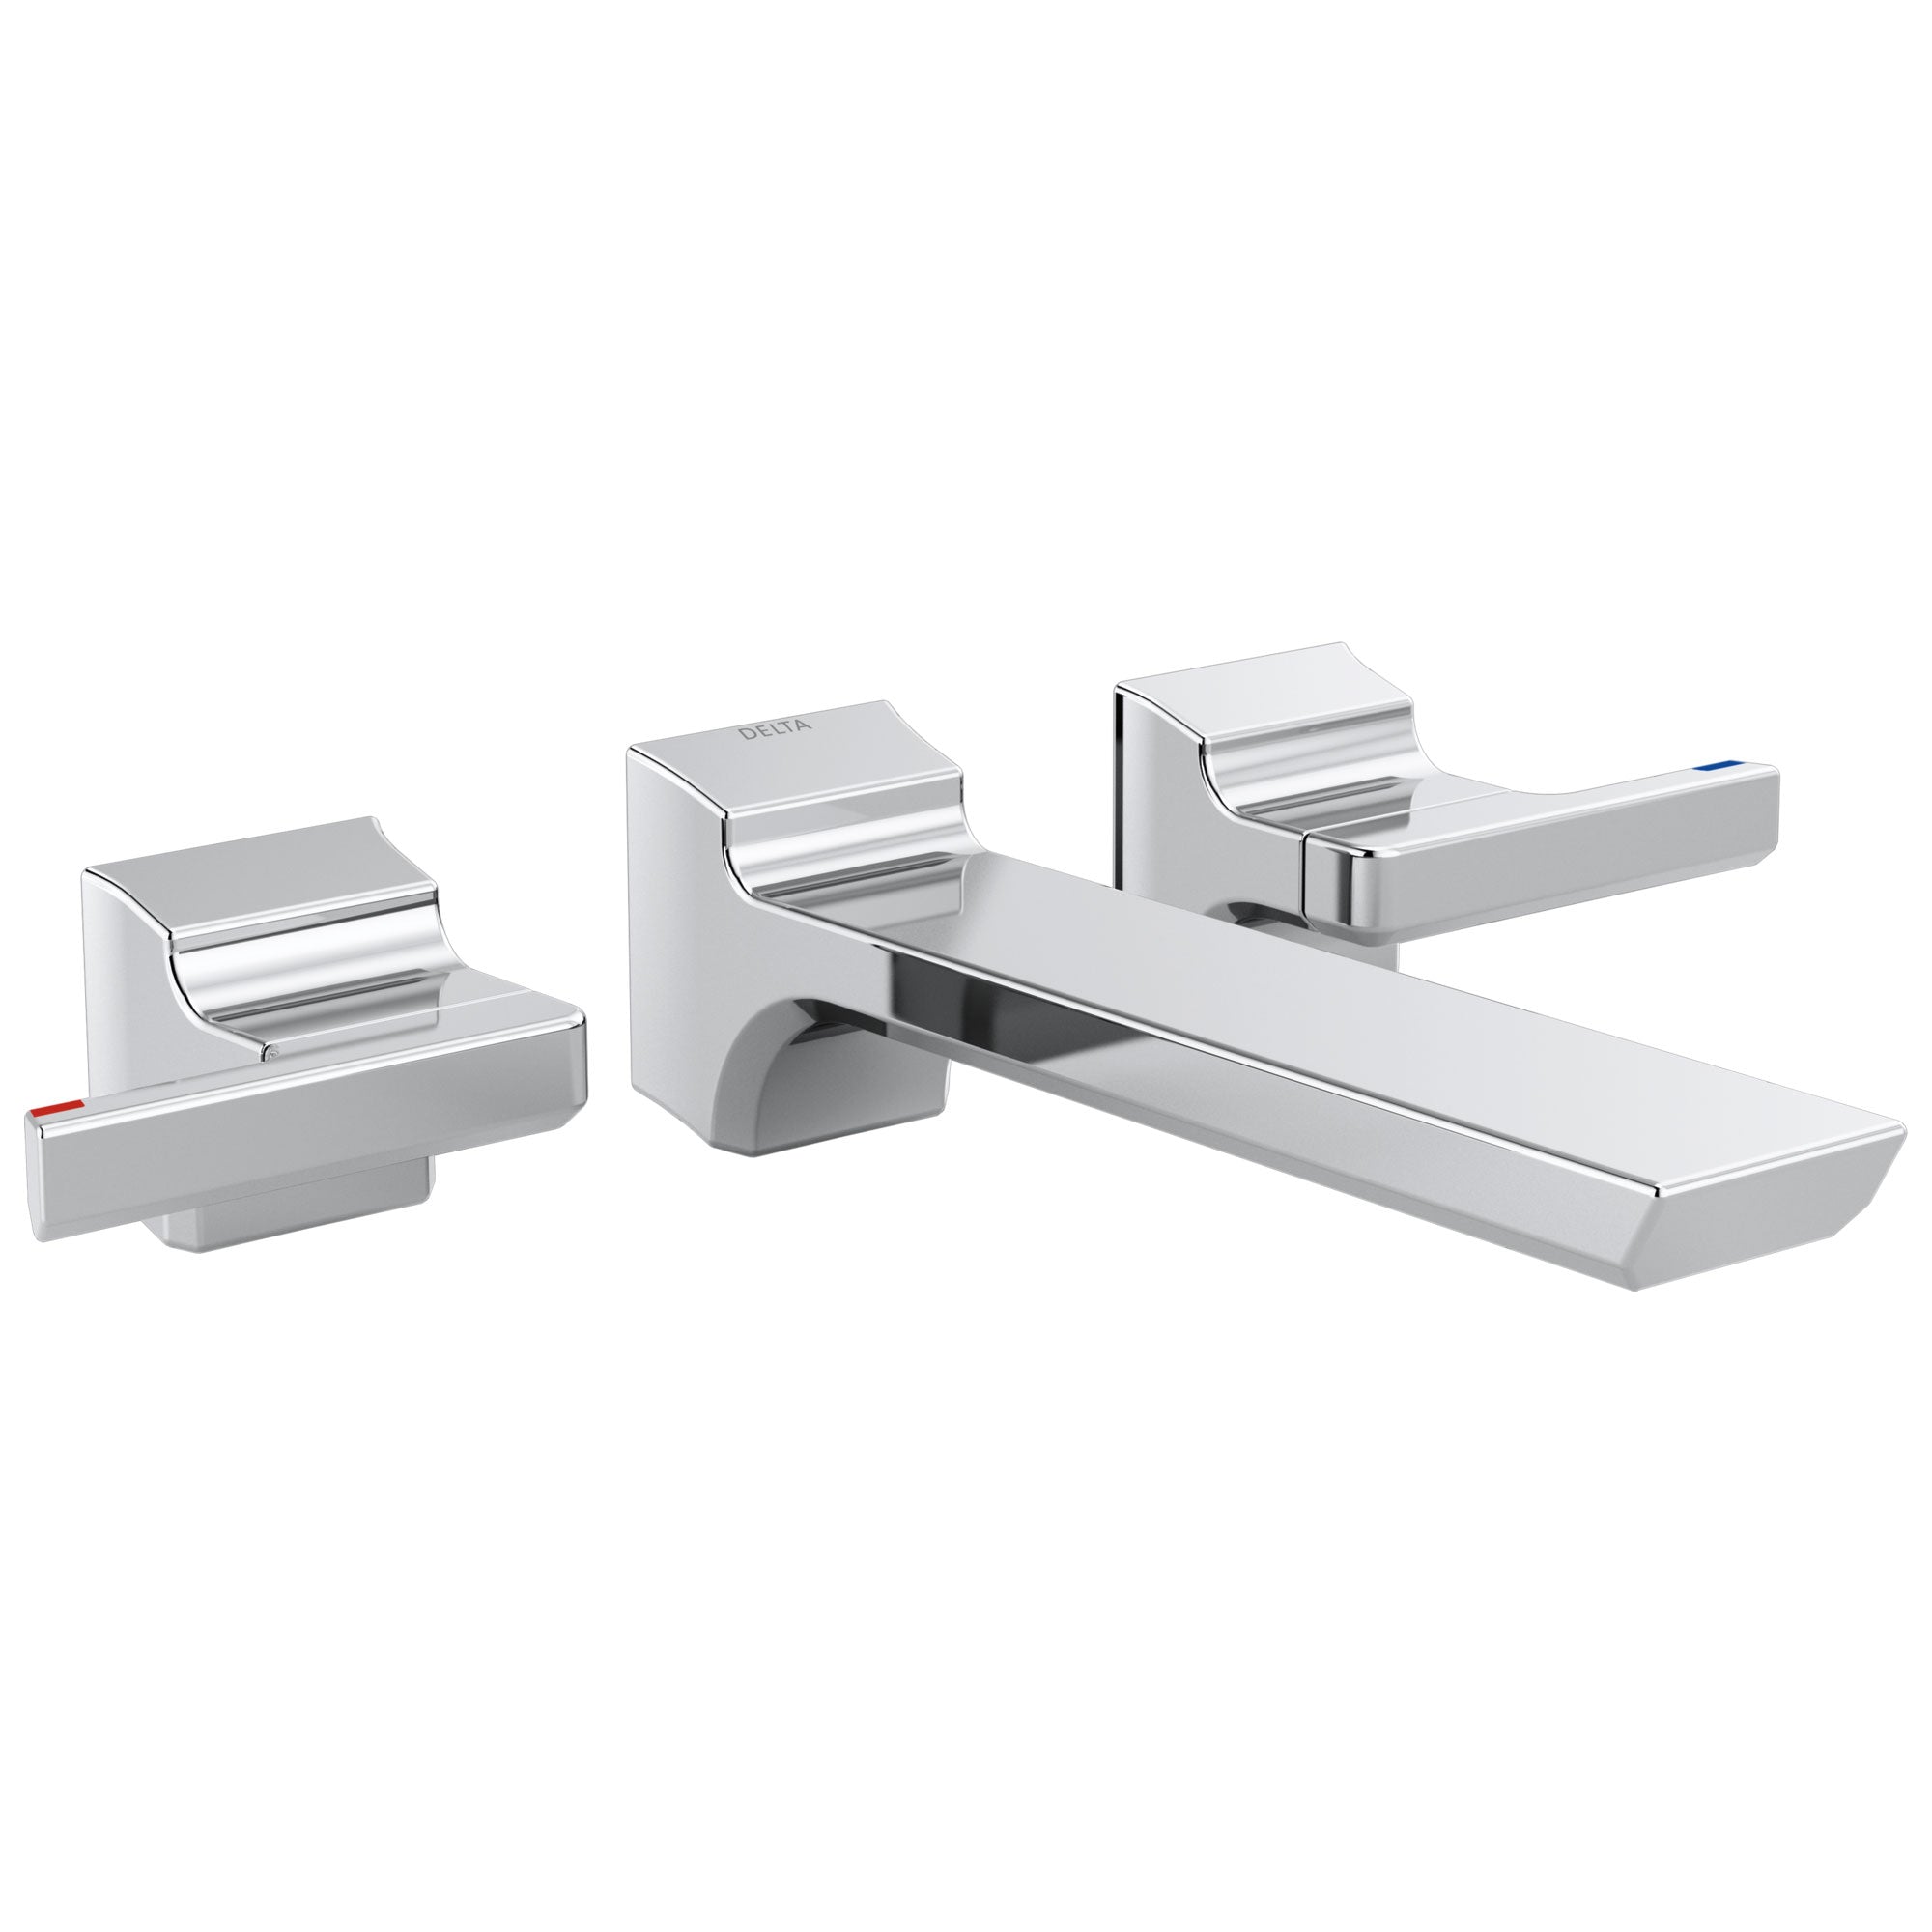 Delta Pivotal Modern Chrome Finish Two-Handle Wall Mount Bathroom Sink Faucet Includes Rough-in Valve D3055V